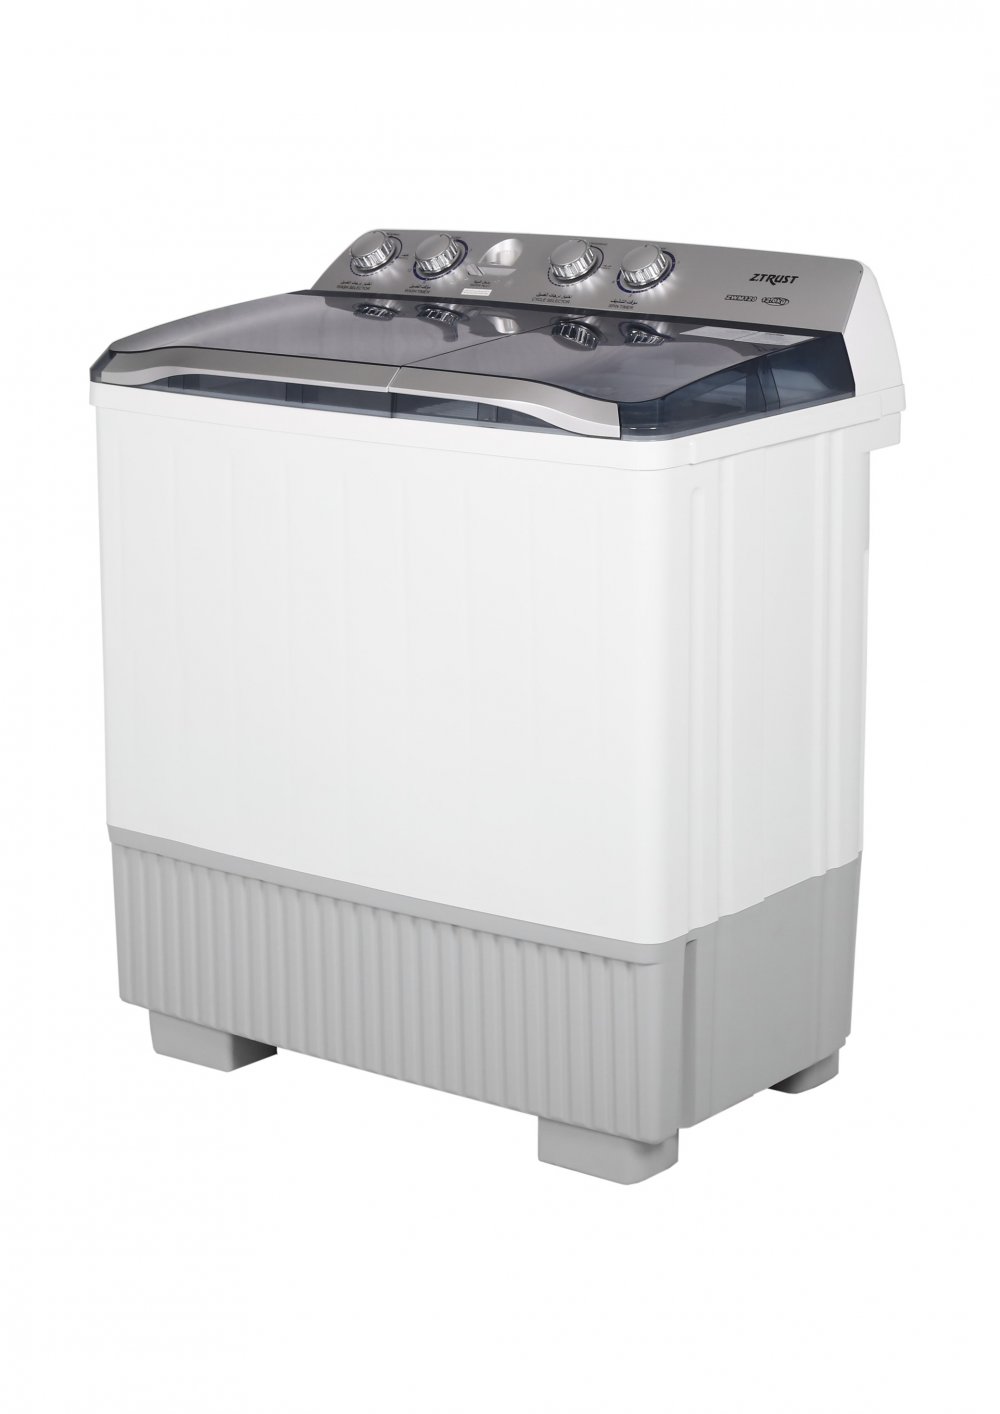 Twin/Top washer, 12K/W,7K/D